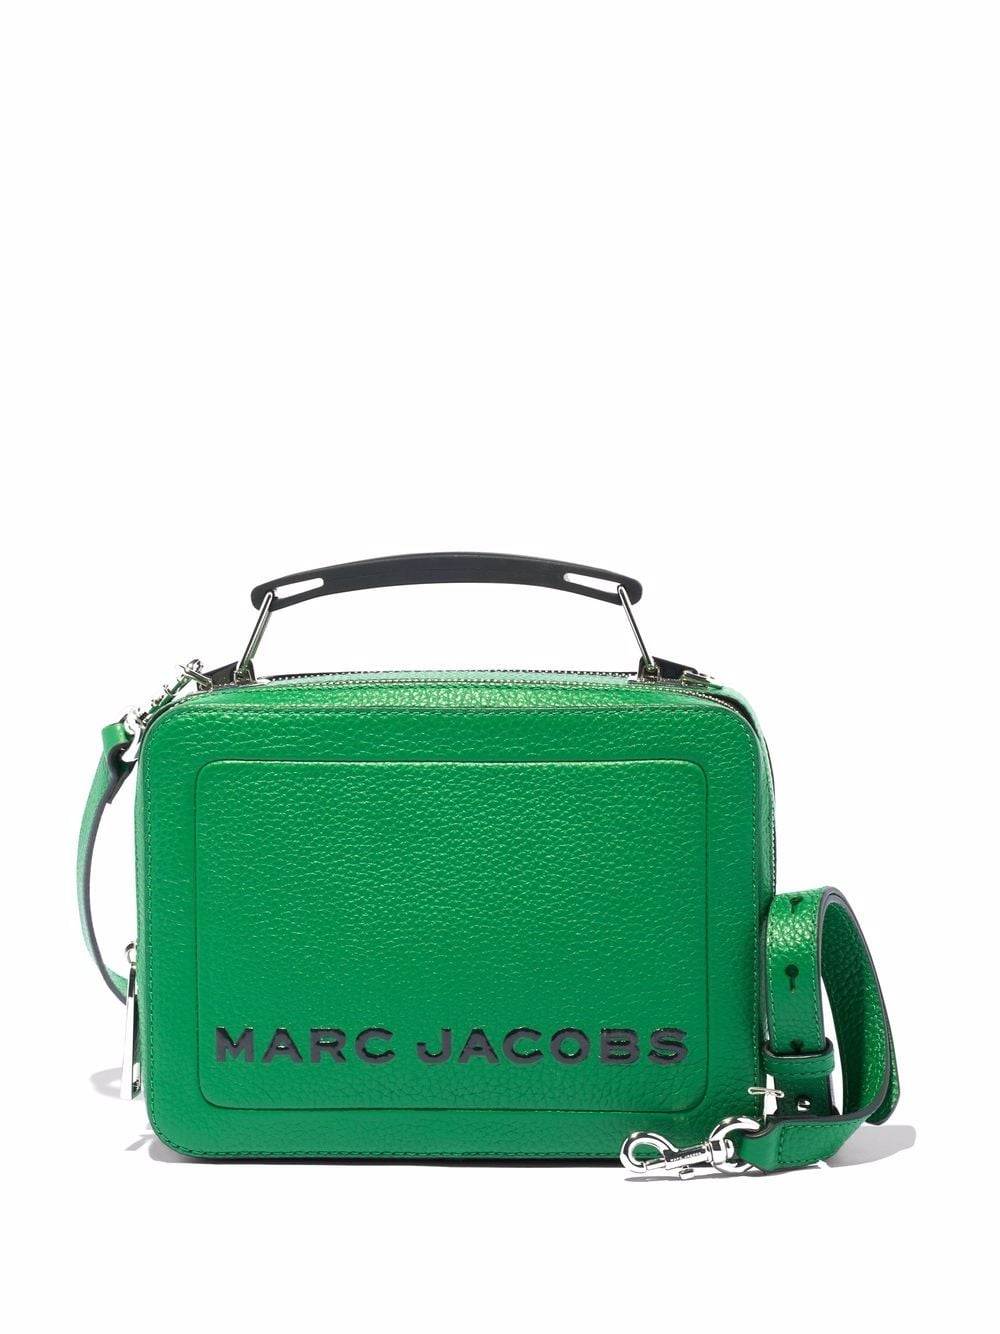 MARC JACOBS The Soft Box 23 Leather Crossbody Bag